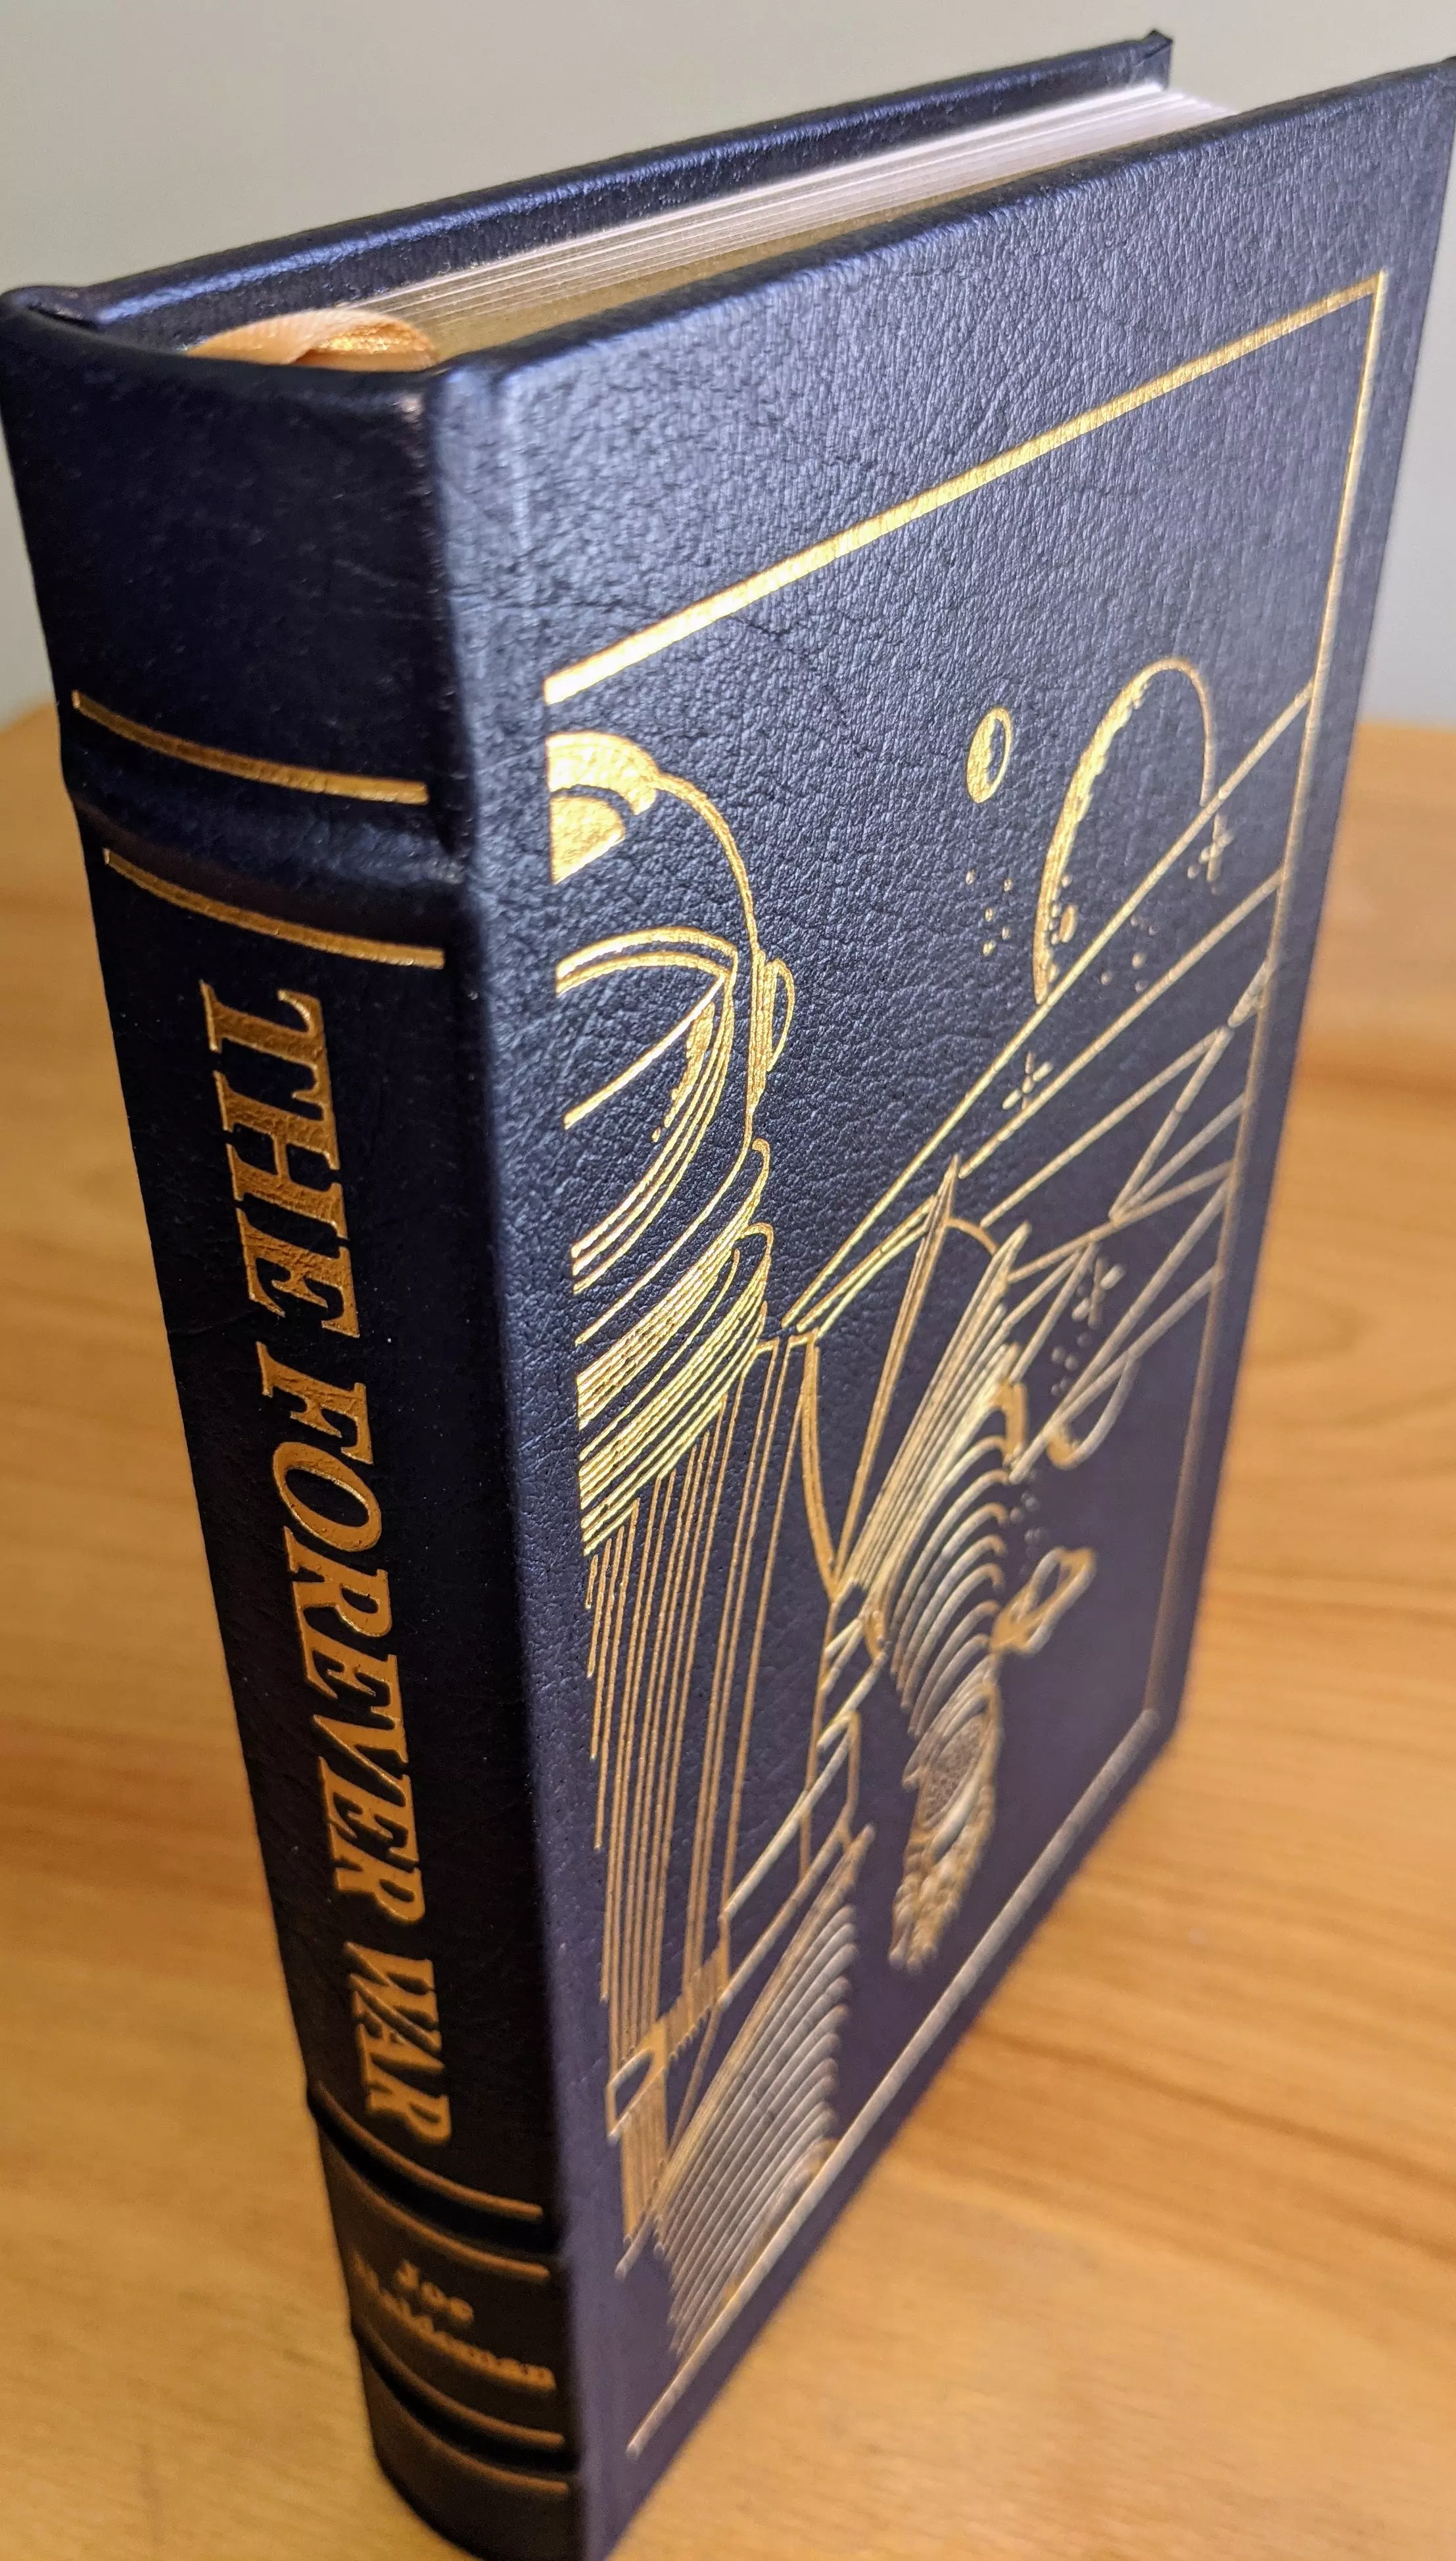 Stunning Blue Leather Bound hardback book with hubbed spine, cover artwork in 22kt gold, printed on archival paper with gold gilded edges, smyth sewing & concealed muslin joints
	  - original artwork by Vincent DiFate